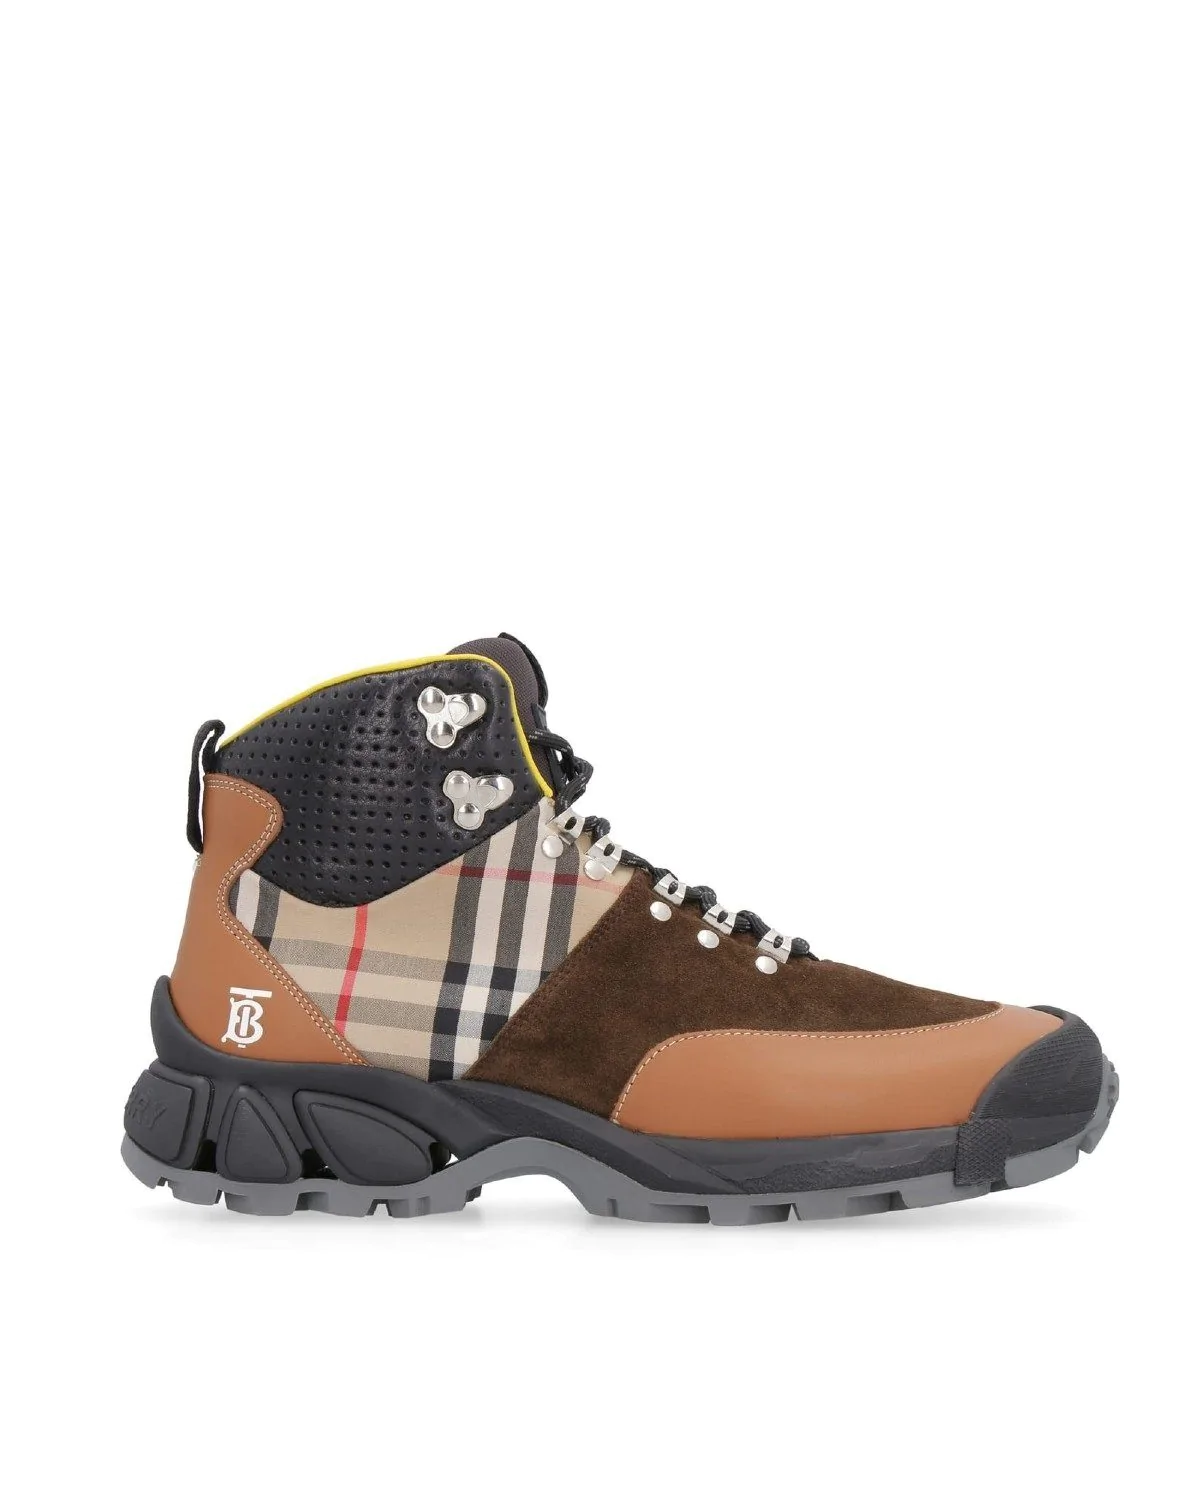 Burberry Men's Vintage Check/Leather Hiking Boots